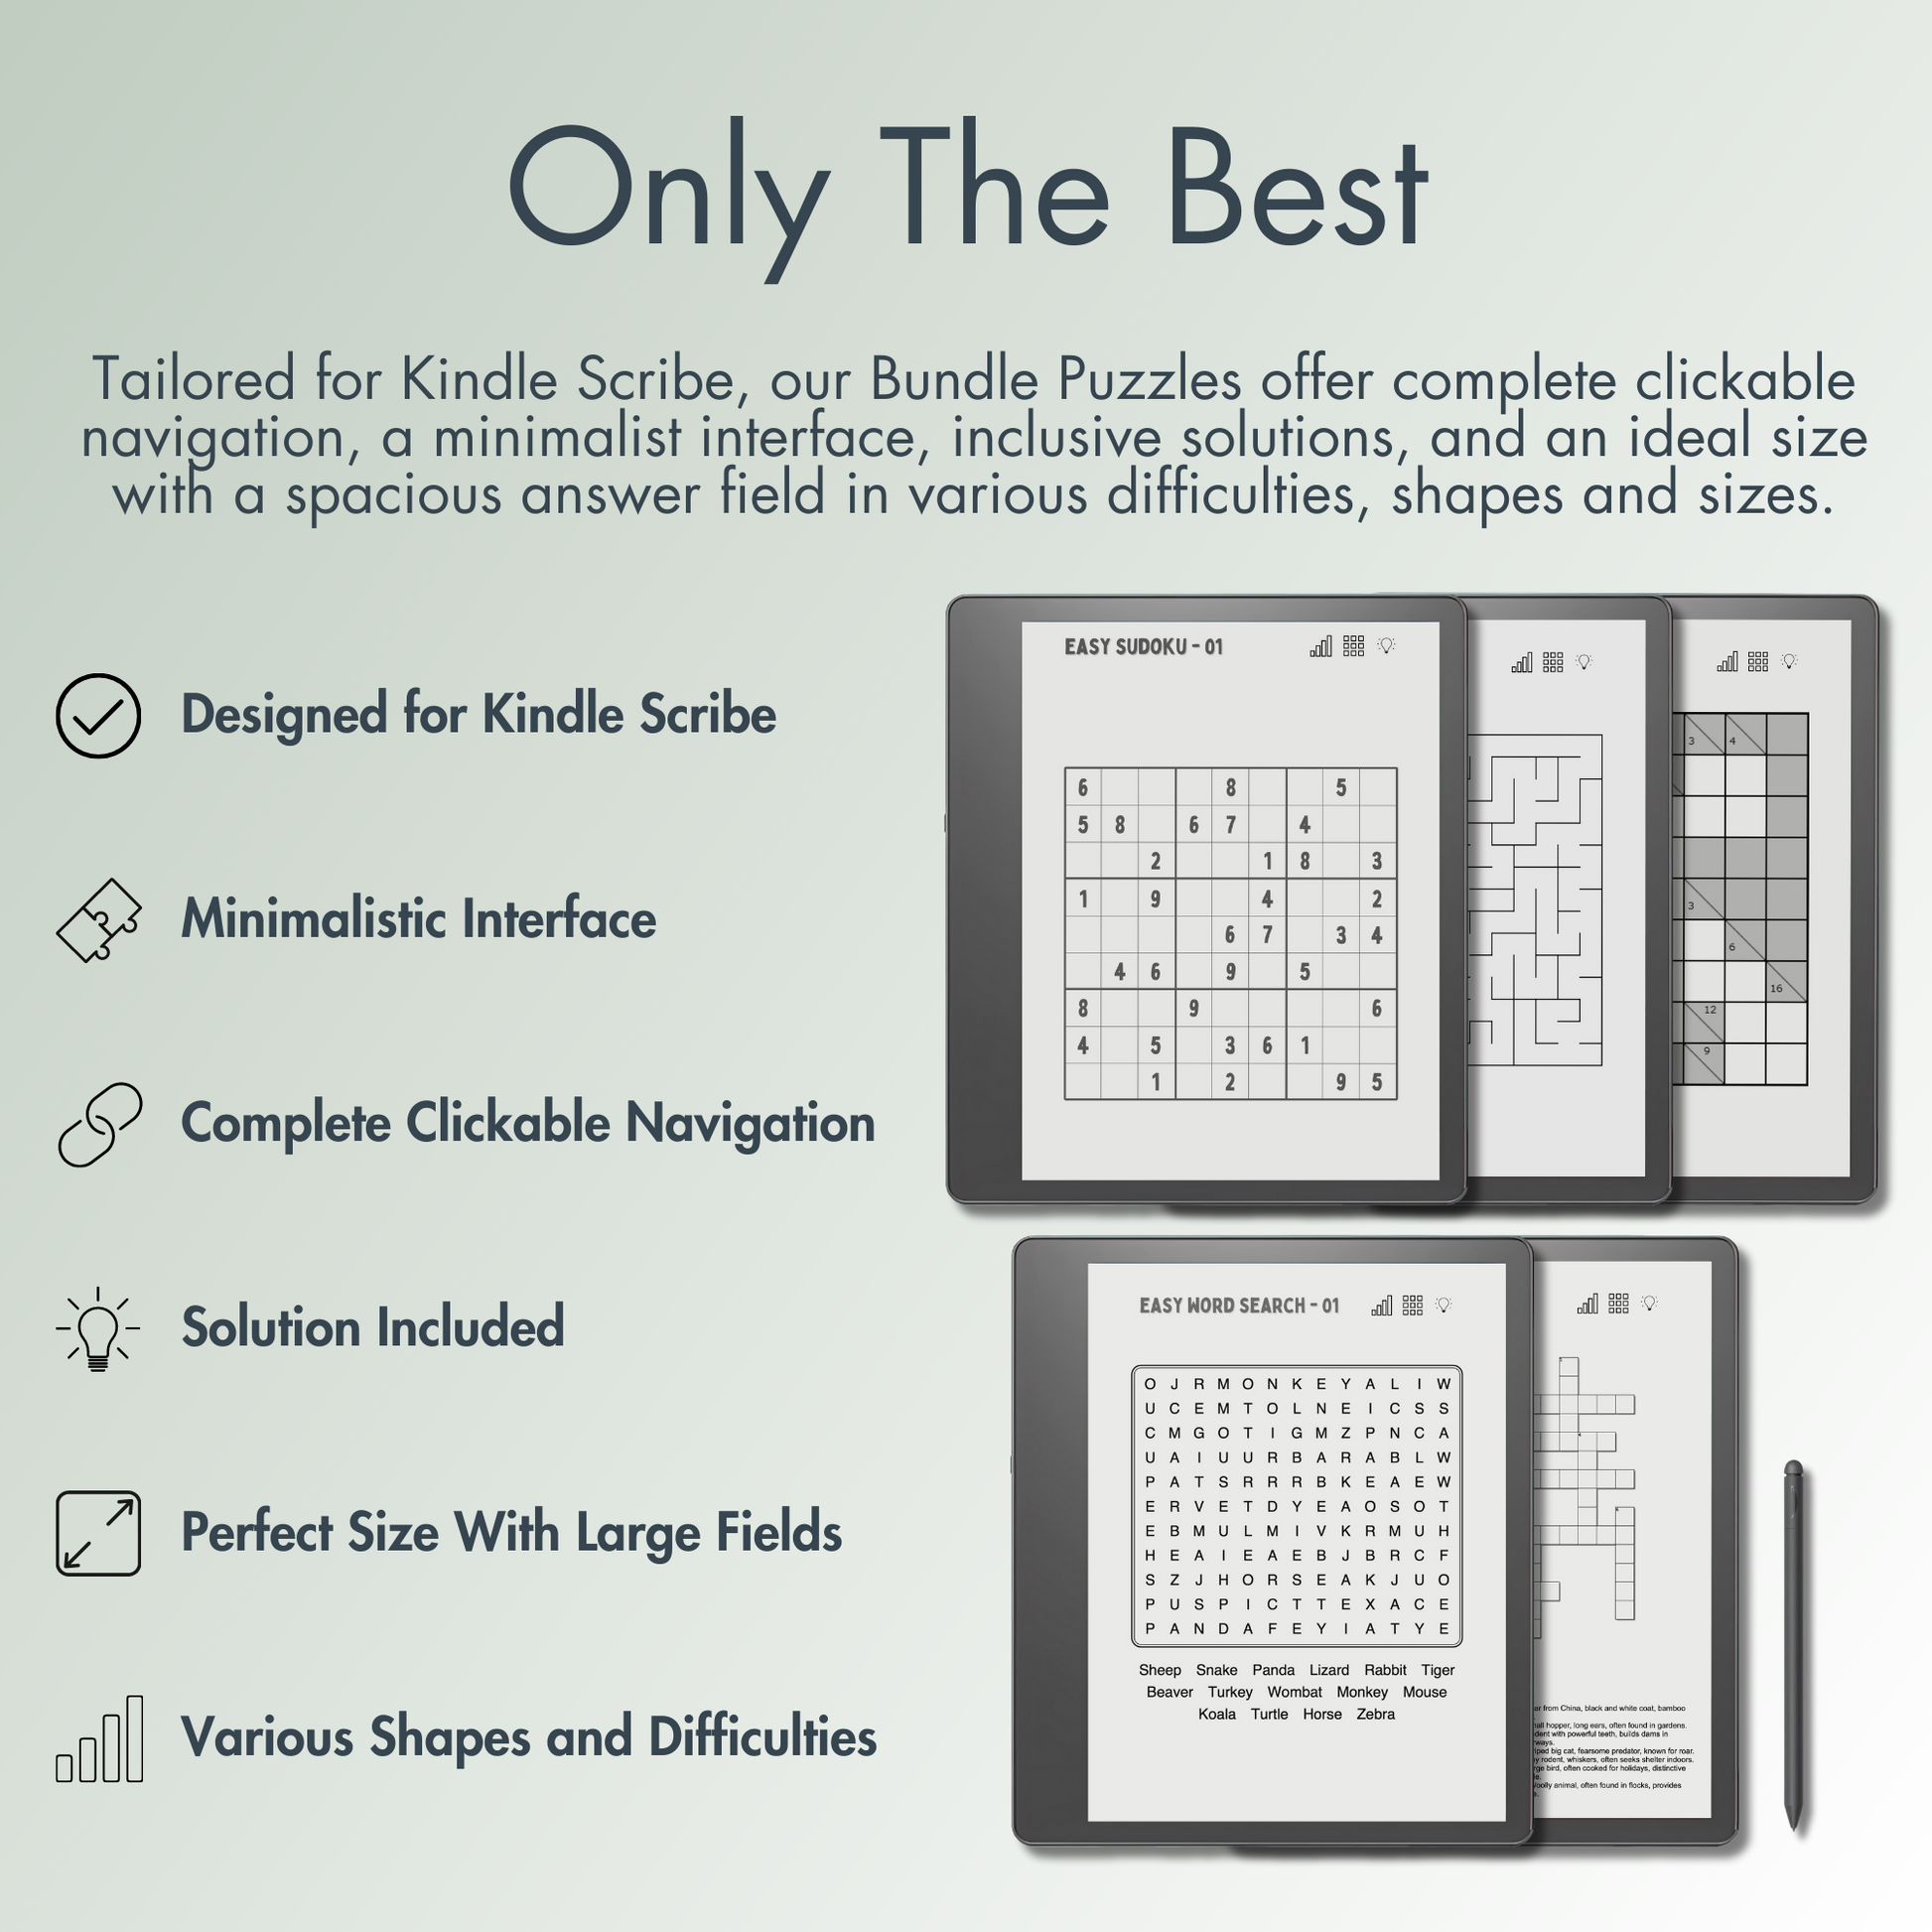 The Bundle offer complete clickable navigation, a minimalist interface, inclusive solutions, and an ideal size with a spacious answer field in various difficulties, shapes and sizes for Kindle Scribe e-ink screen.